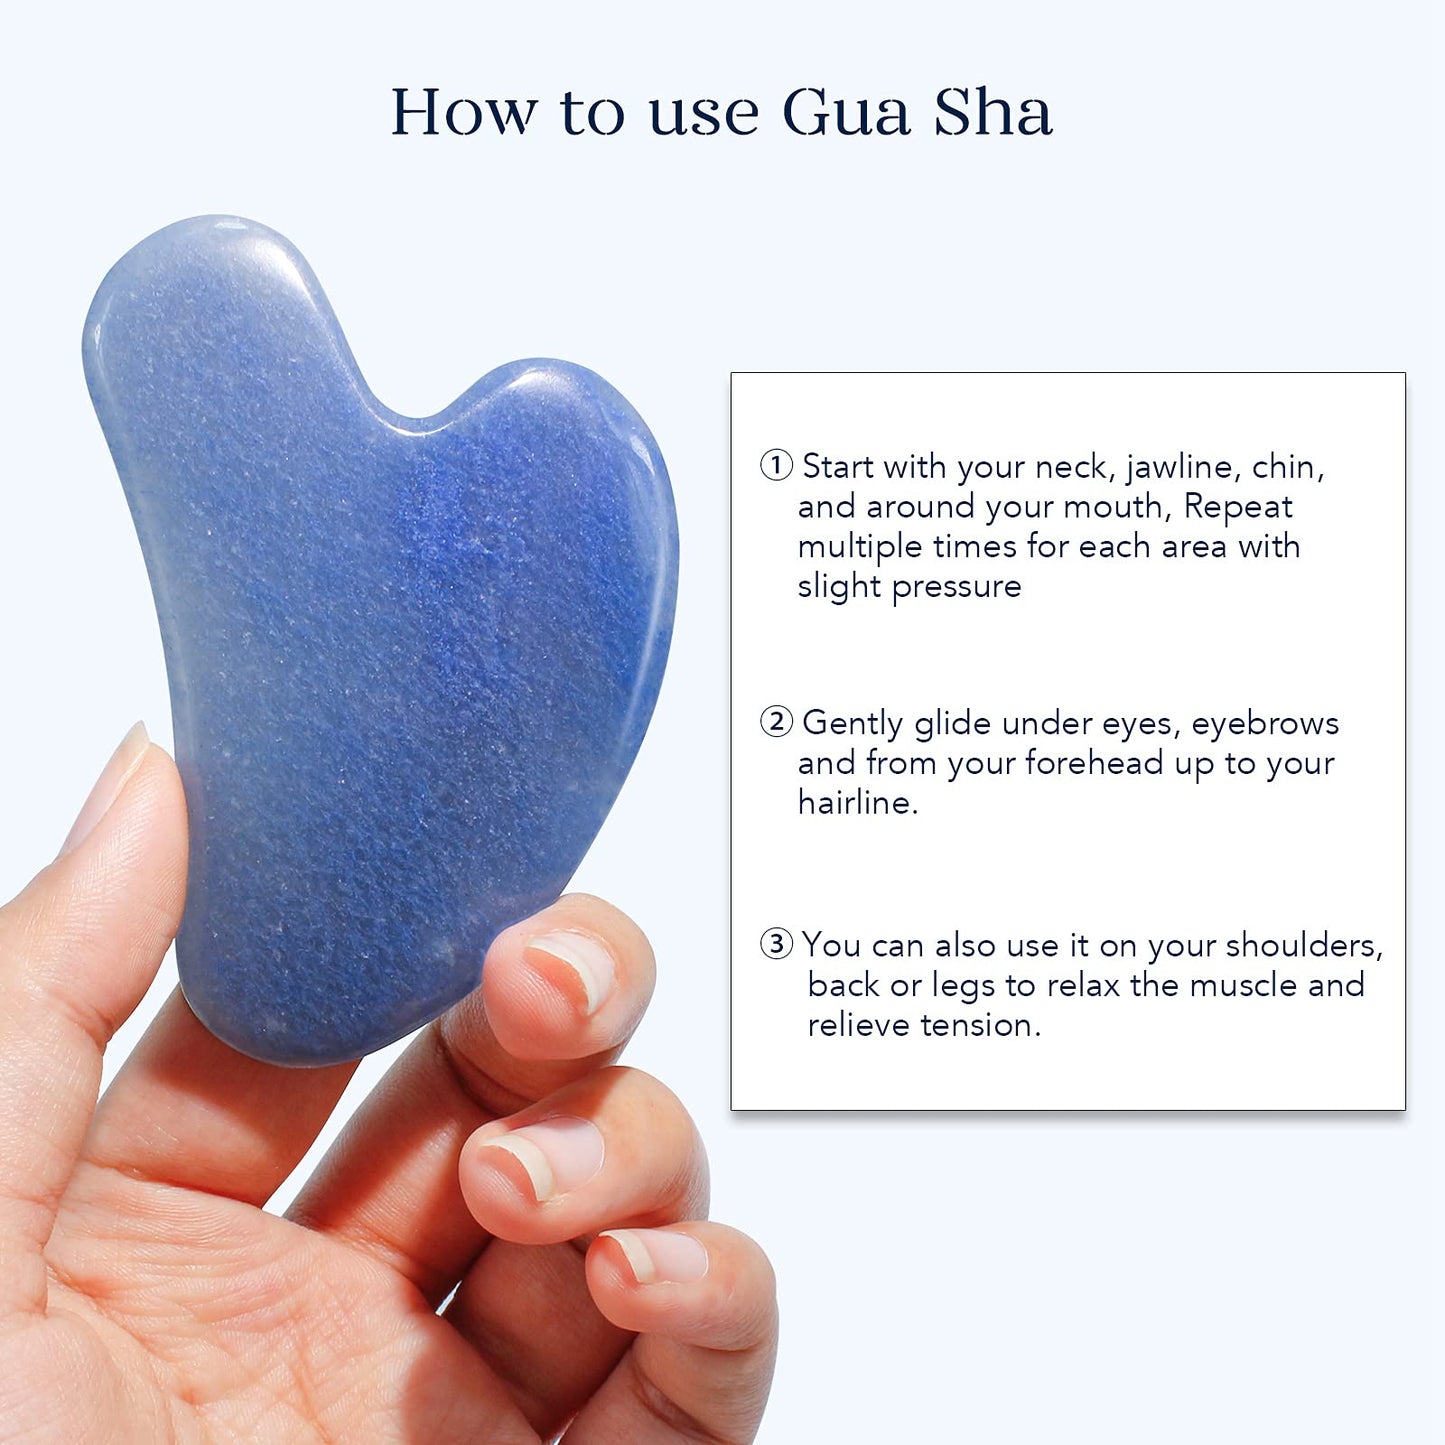 BAIMEI Jade Roller & Gua Sha, Face Roller, Facial Beauty Roller Skin Care Tools, Self Care Gift for Men Women, Massager for Face, Eyes, Neck, Relieve Fine Lines and Wrinkles - Blue